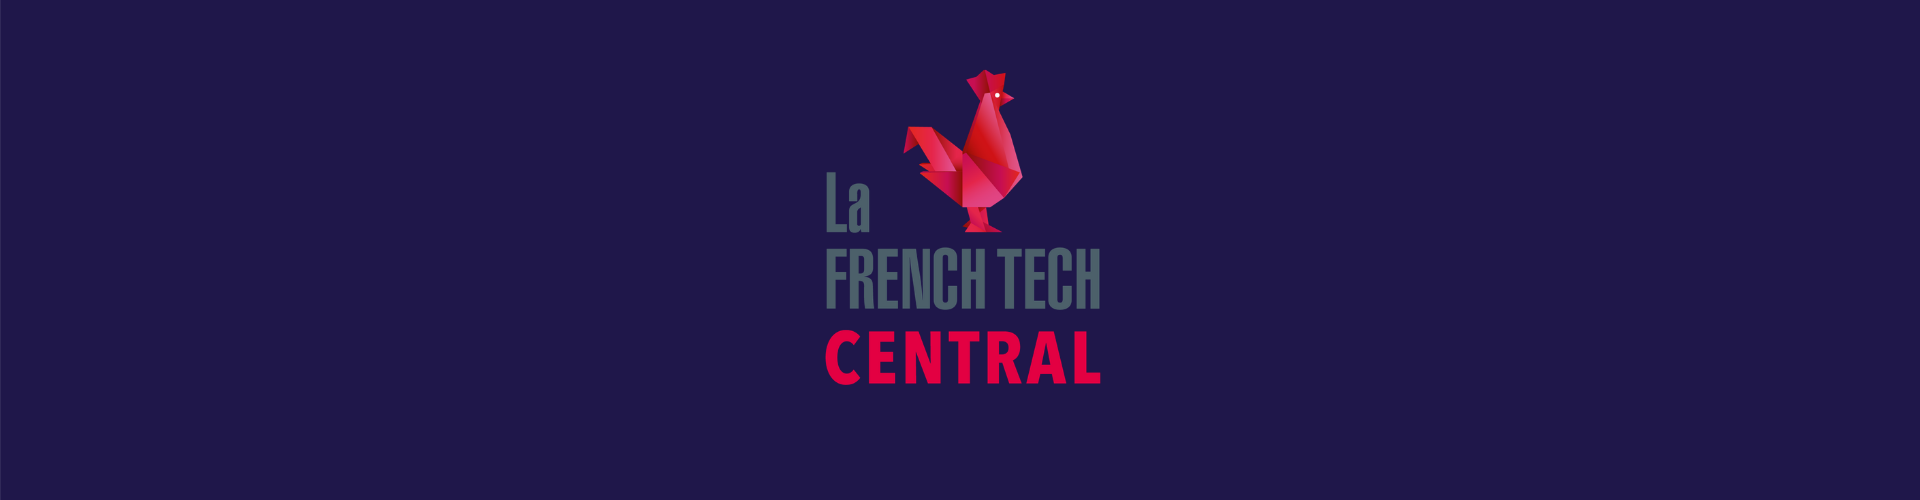 french tech central